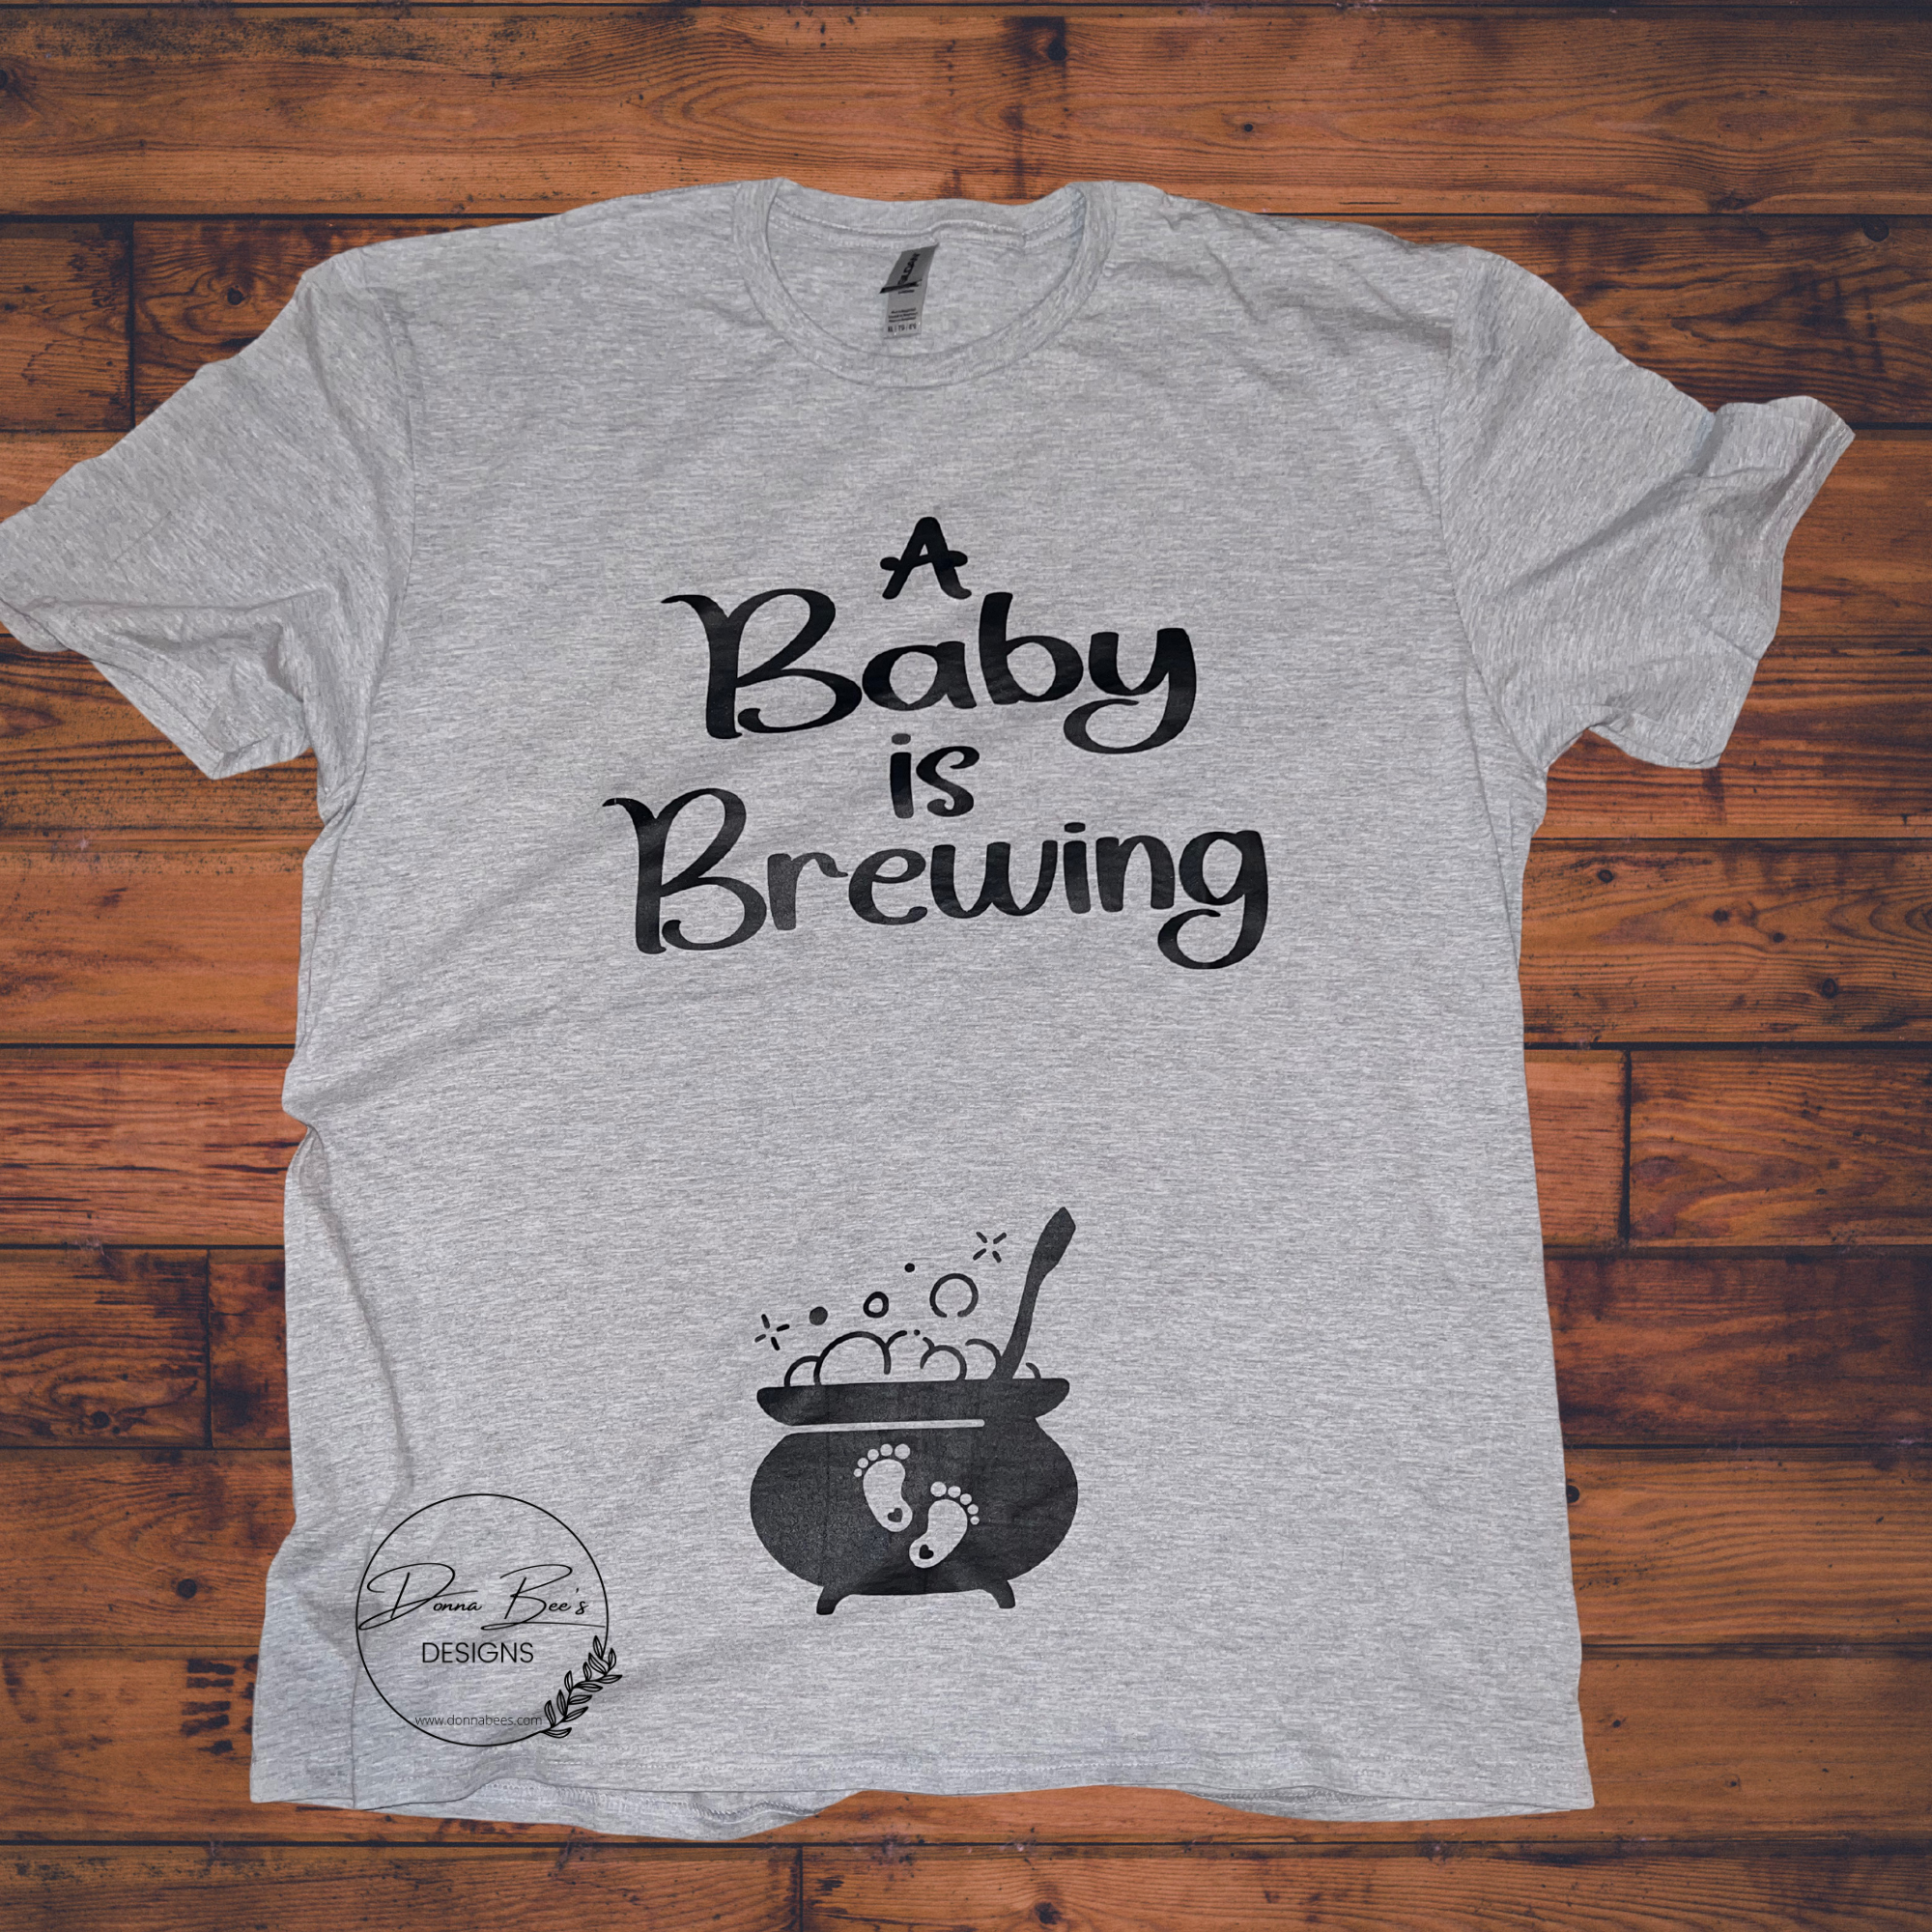 We’re Pregnant | Baby Brewing | Pregnancy announcement couples T-shirt